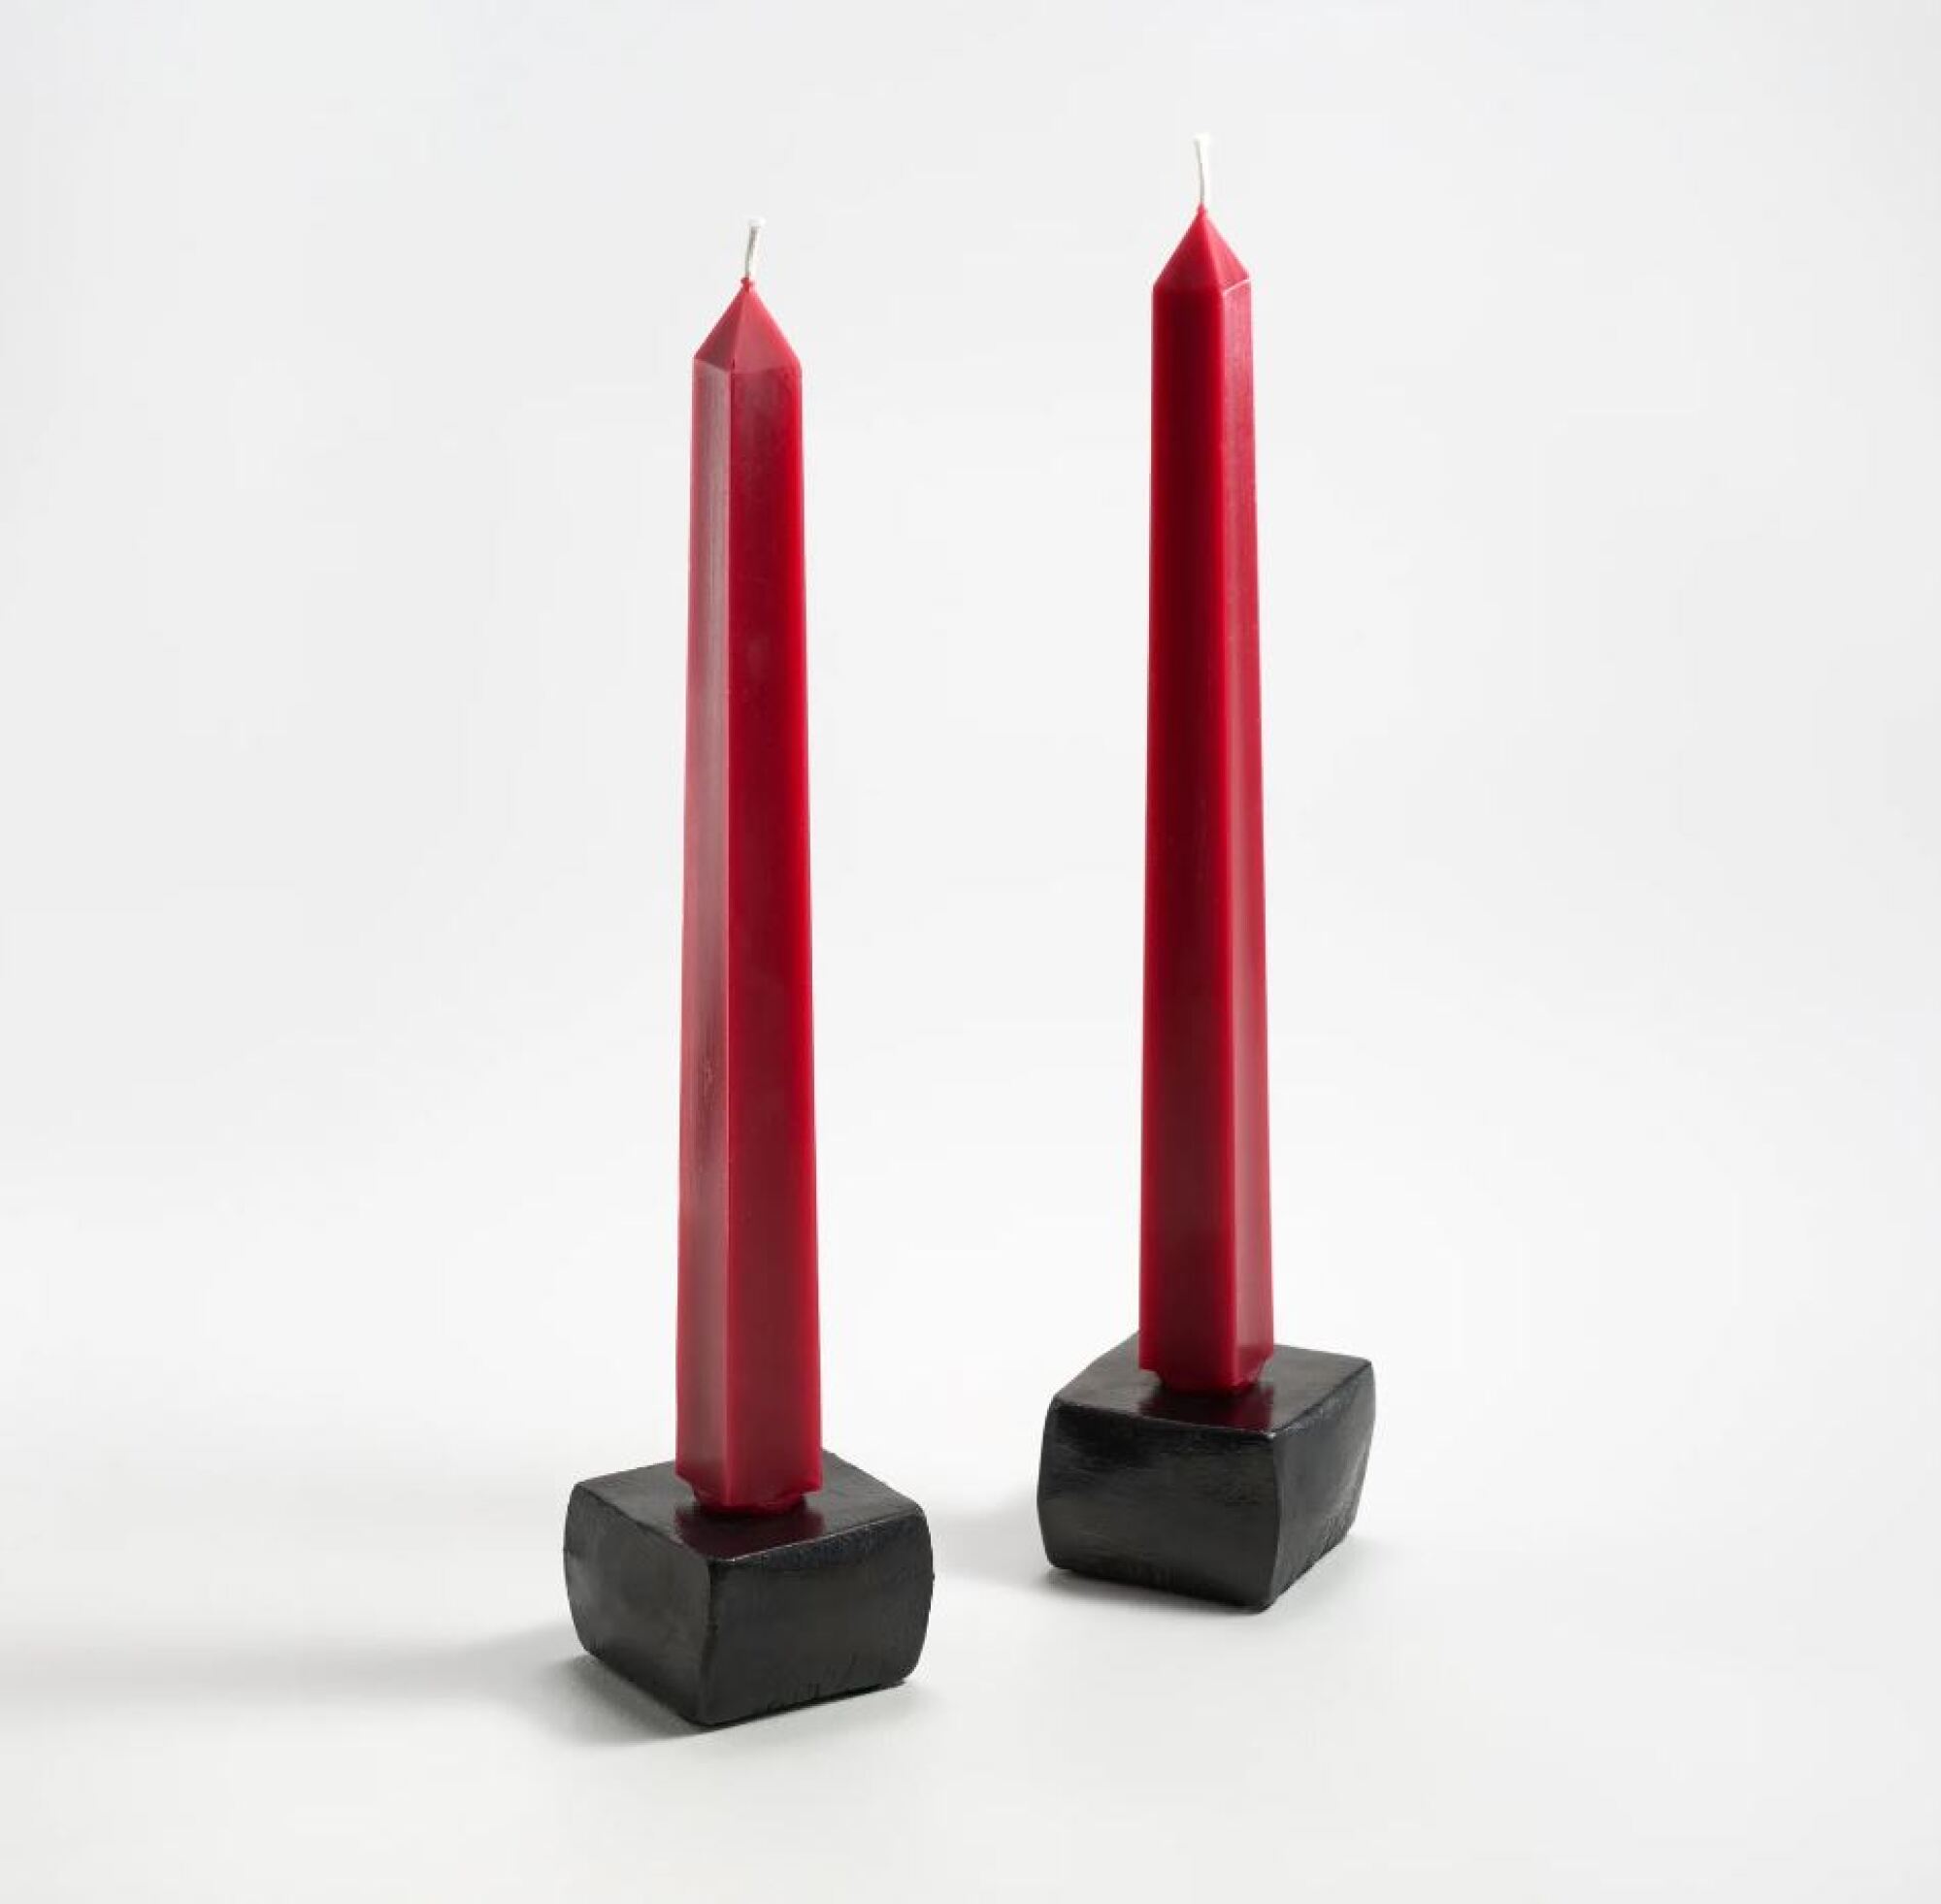 Two red candles sticks 